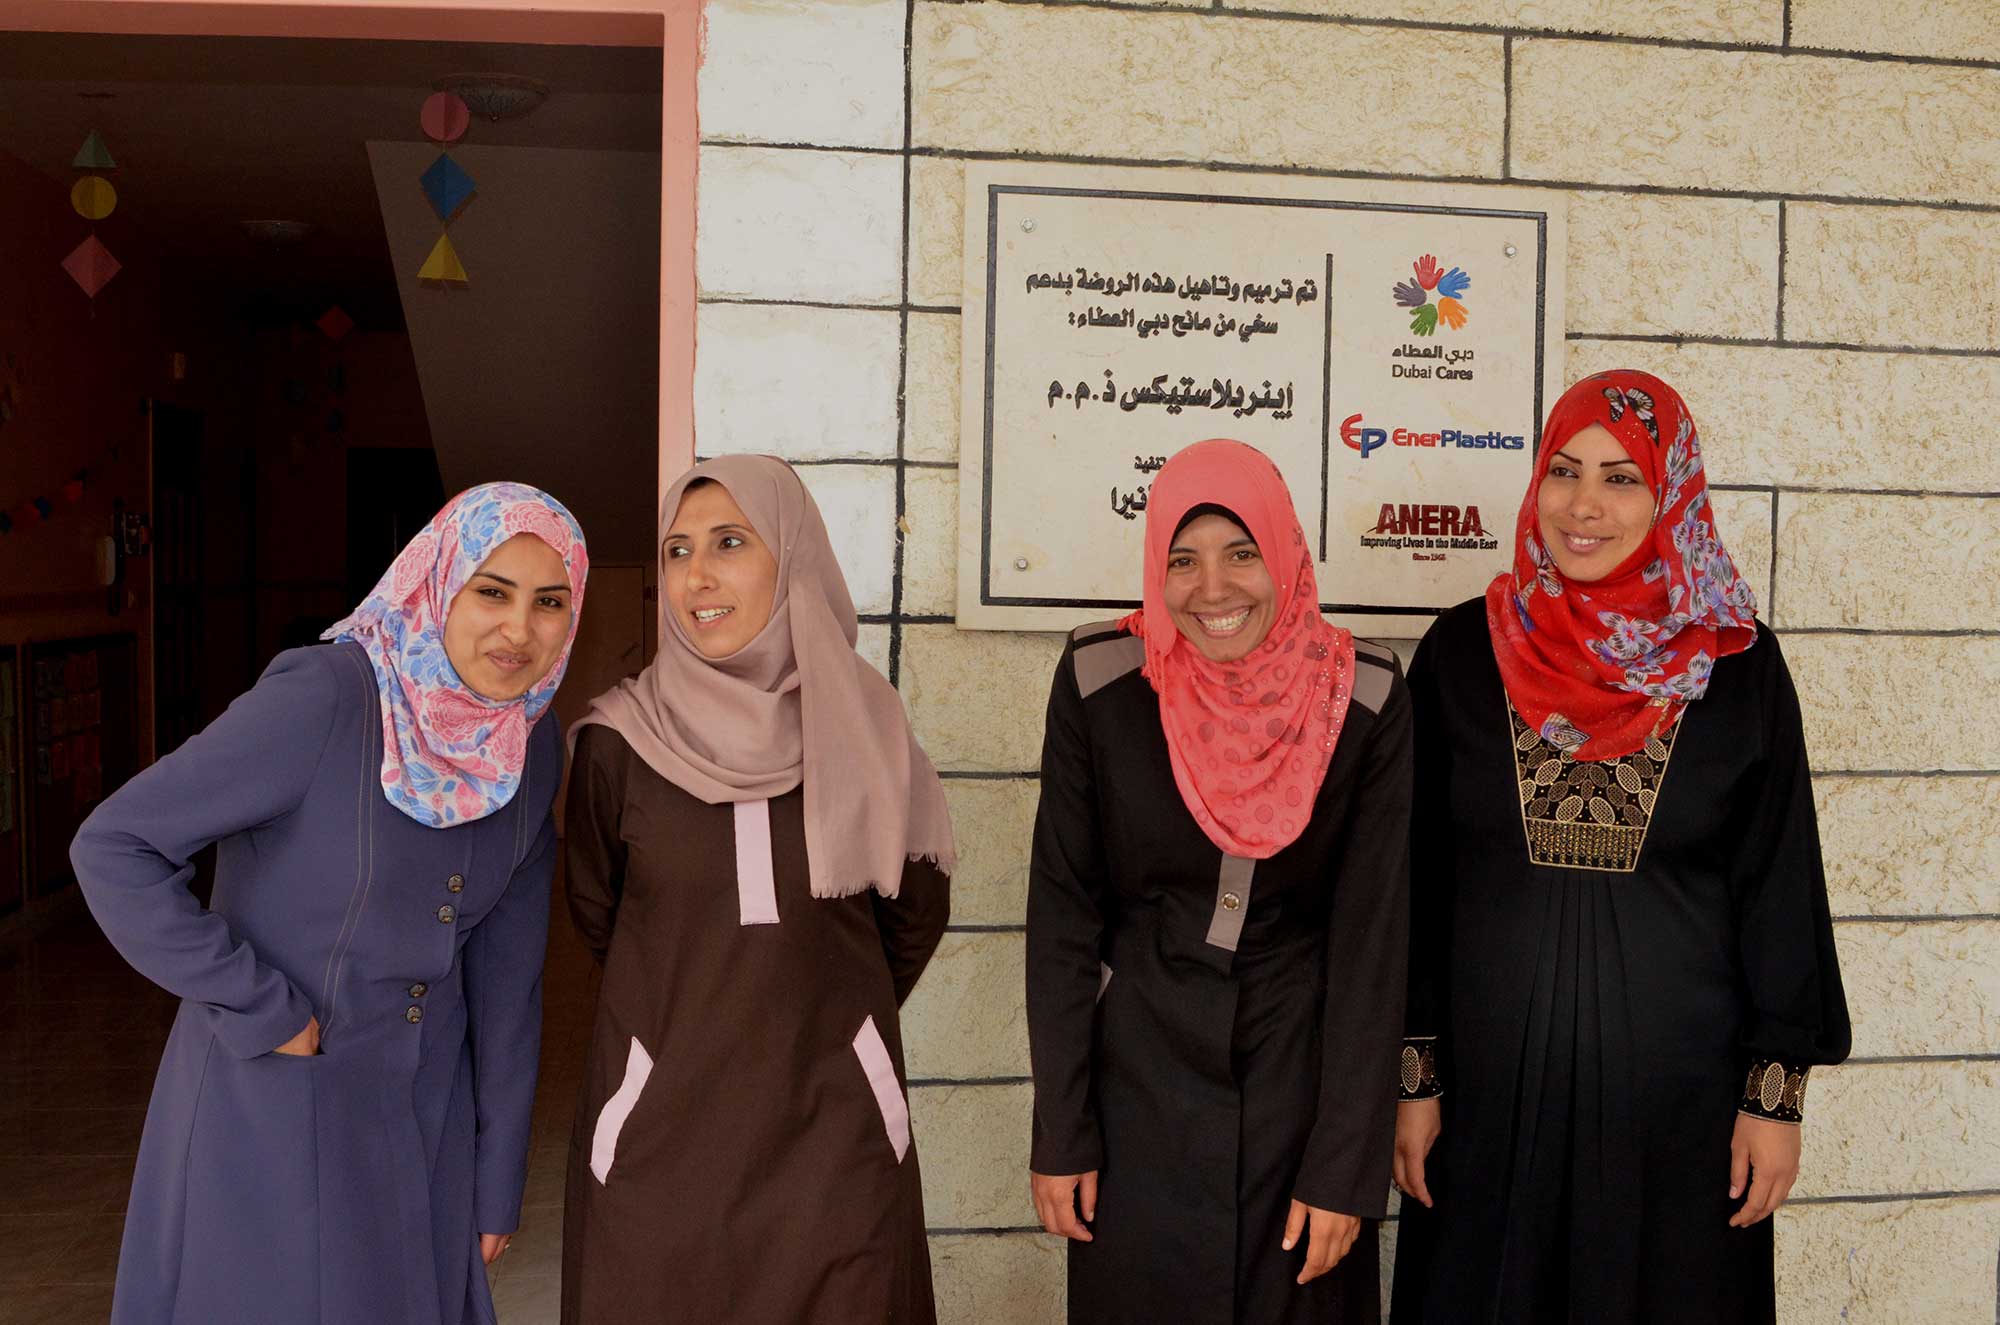 Anera has trained scores of Palestinian preschool teachers, who are dedicated to giving children the opportunity to succeed.